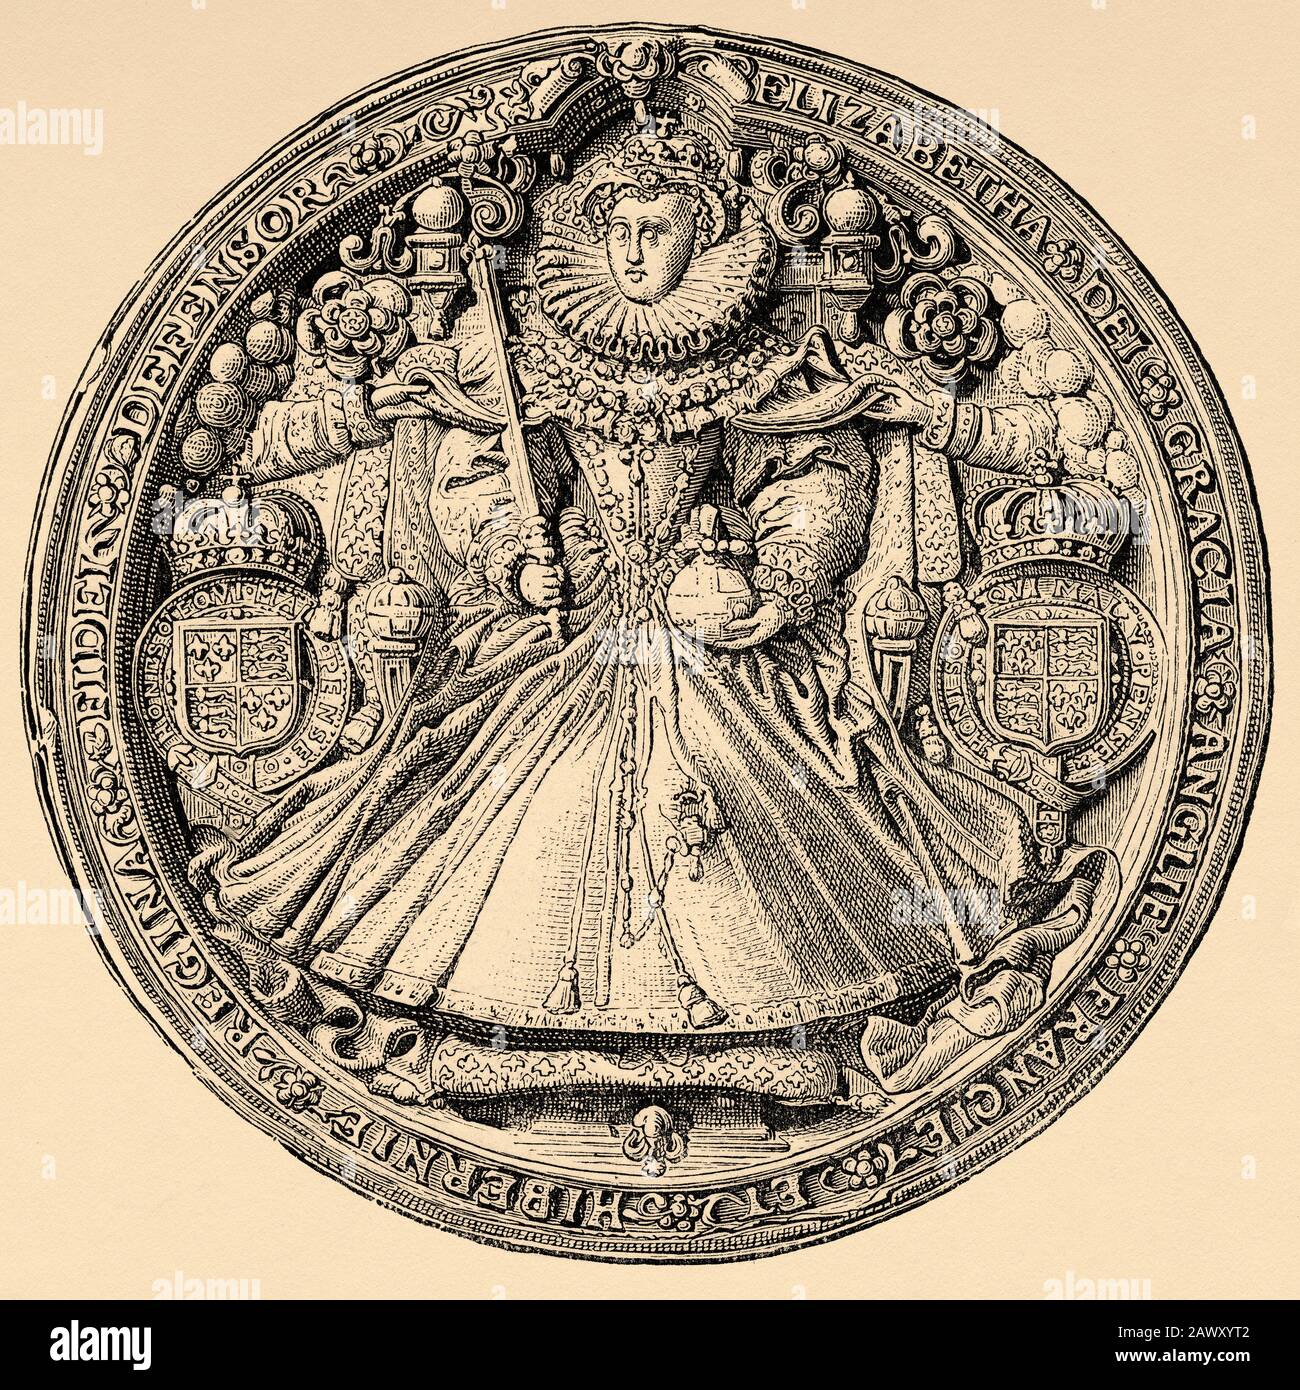 Portrait medal of Elizabeth I of England. The Virgin Queen, Gloriana or the Good Queen Bess (Greenwich, September 7, 1533 - Richmond, March 24, 1603). Stock Photo